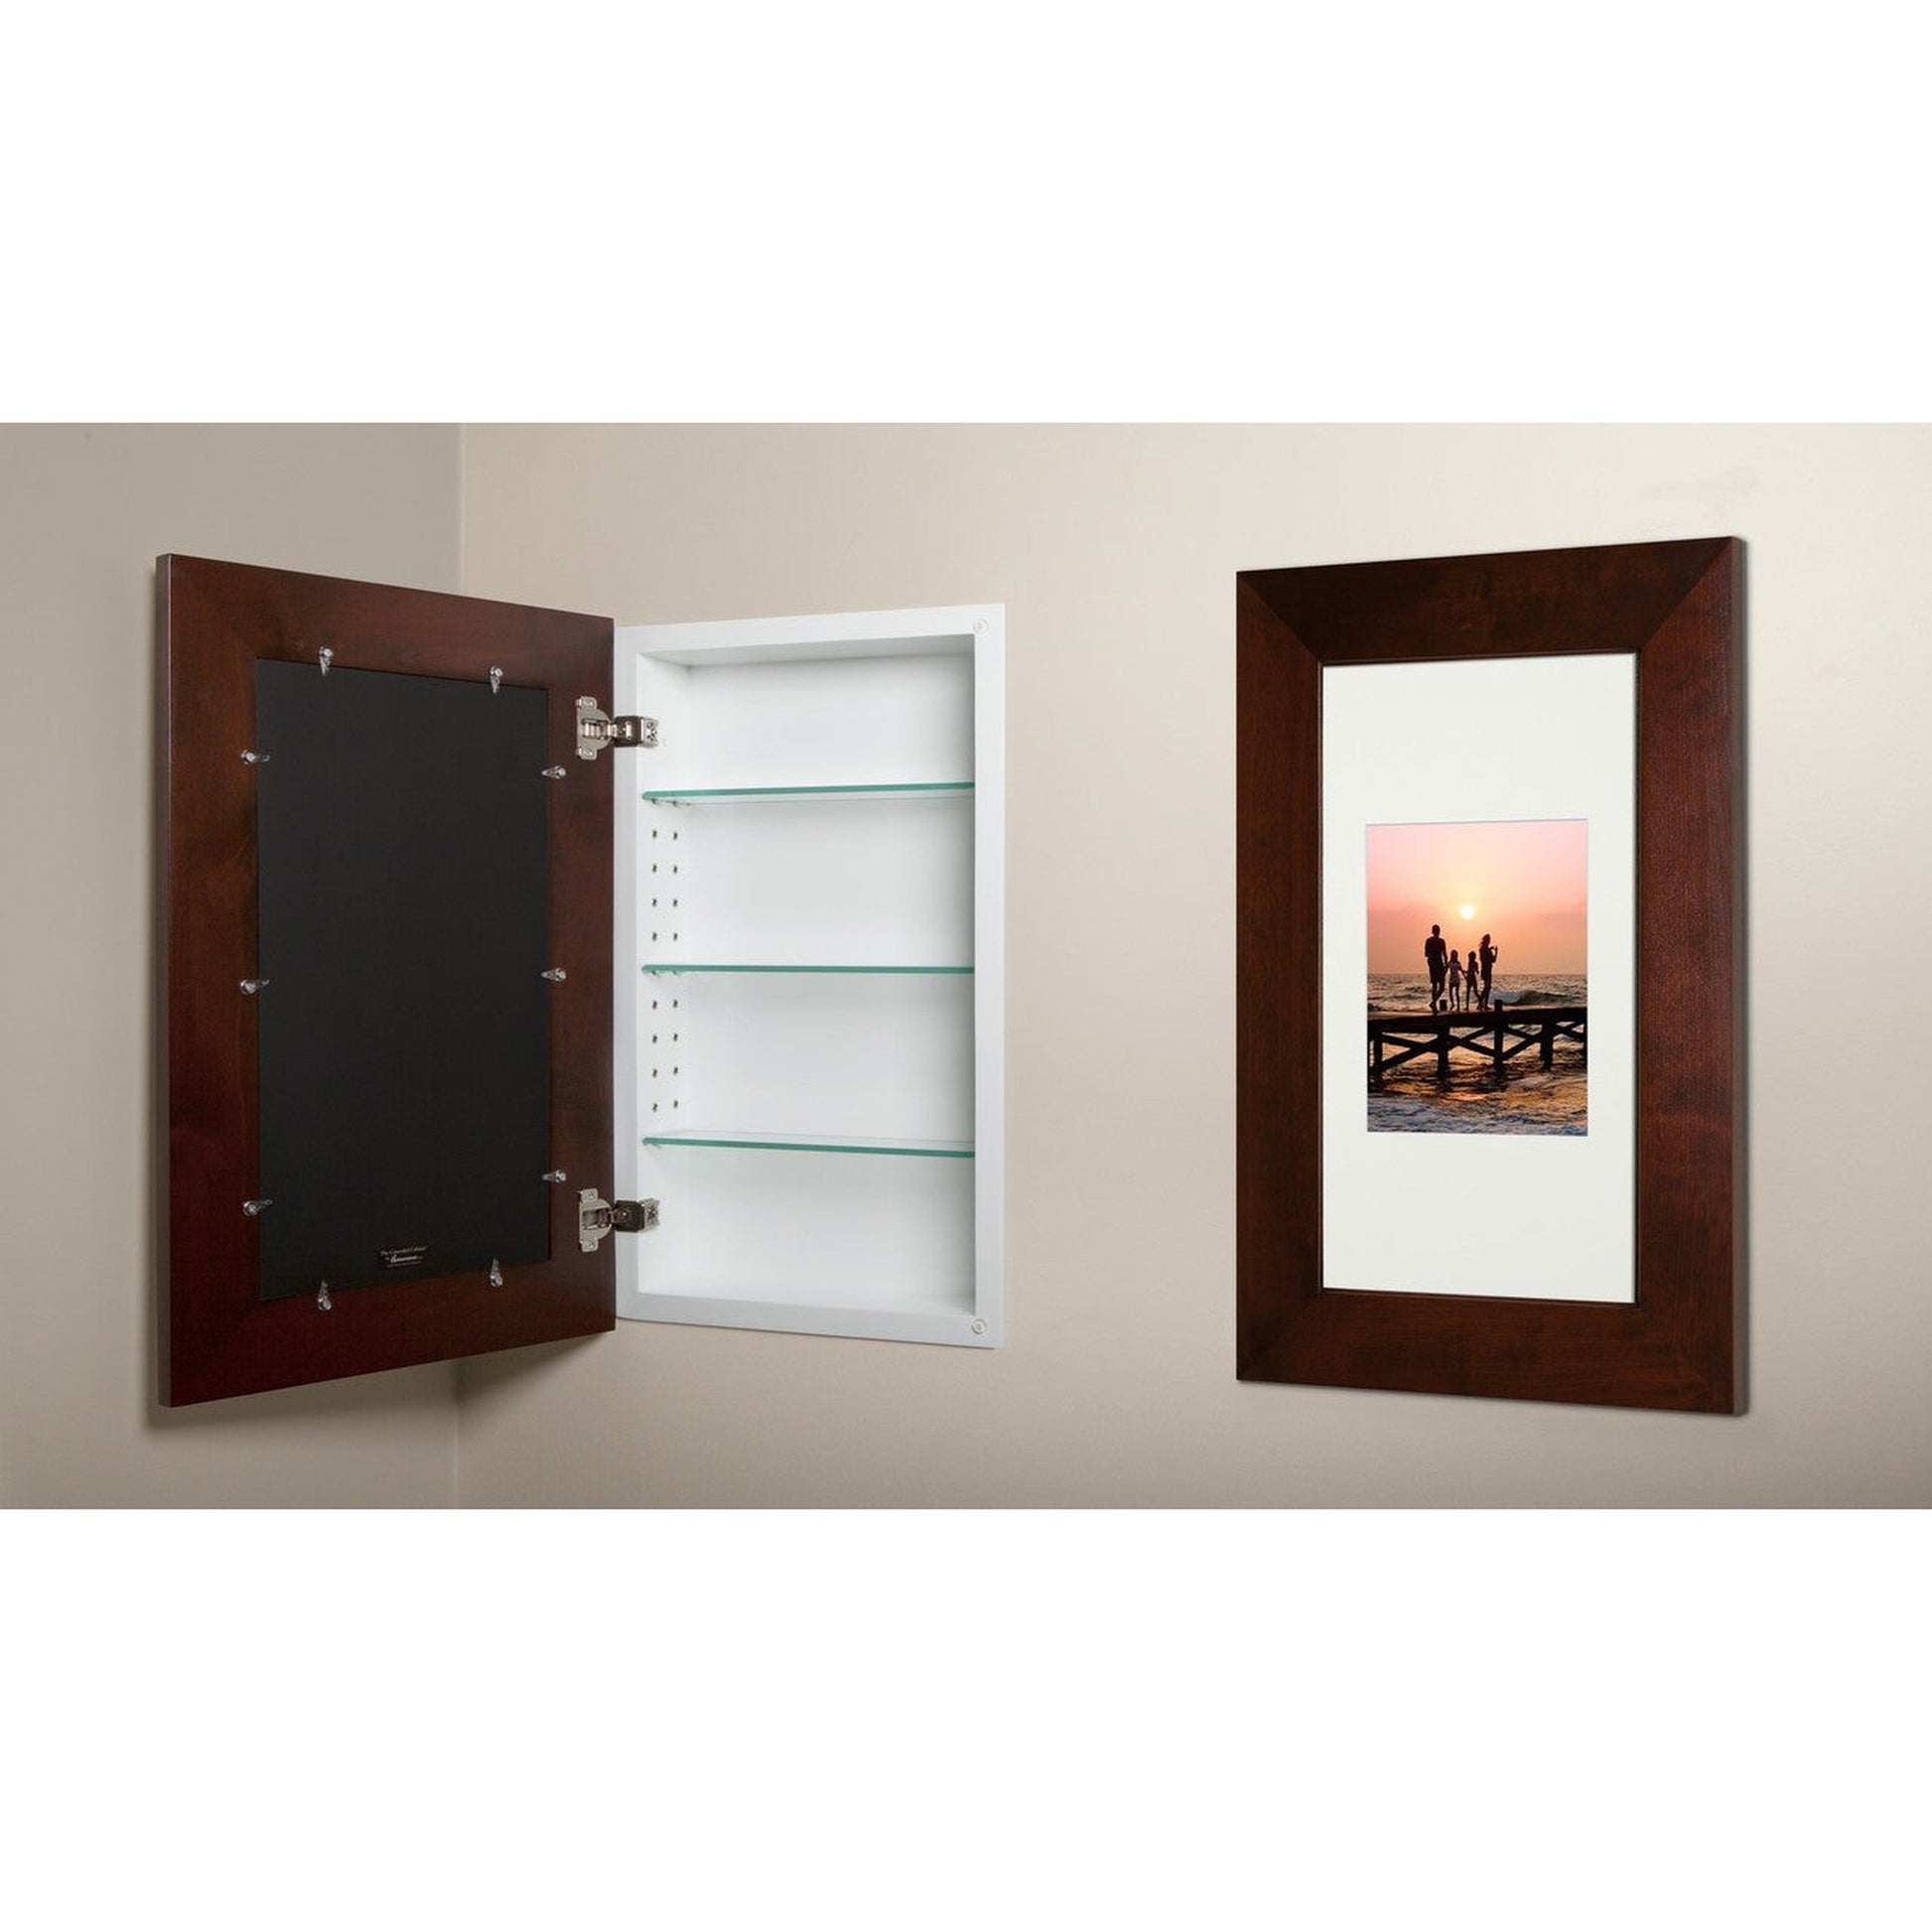 Fox Hollow Furnishings 14" x 24" Espresso Extra Large Standard 3.75" Depth Natural Interior Recessed Picture Frame Medicine Cabinet With Mirror and Black Matting